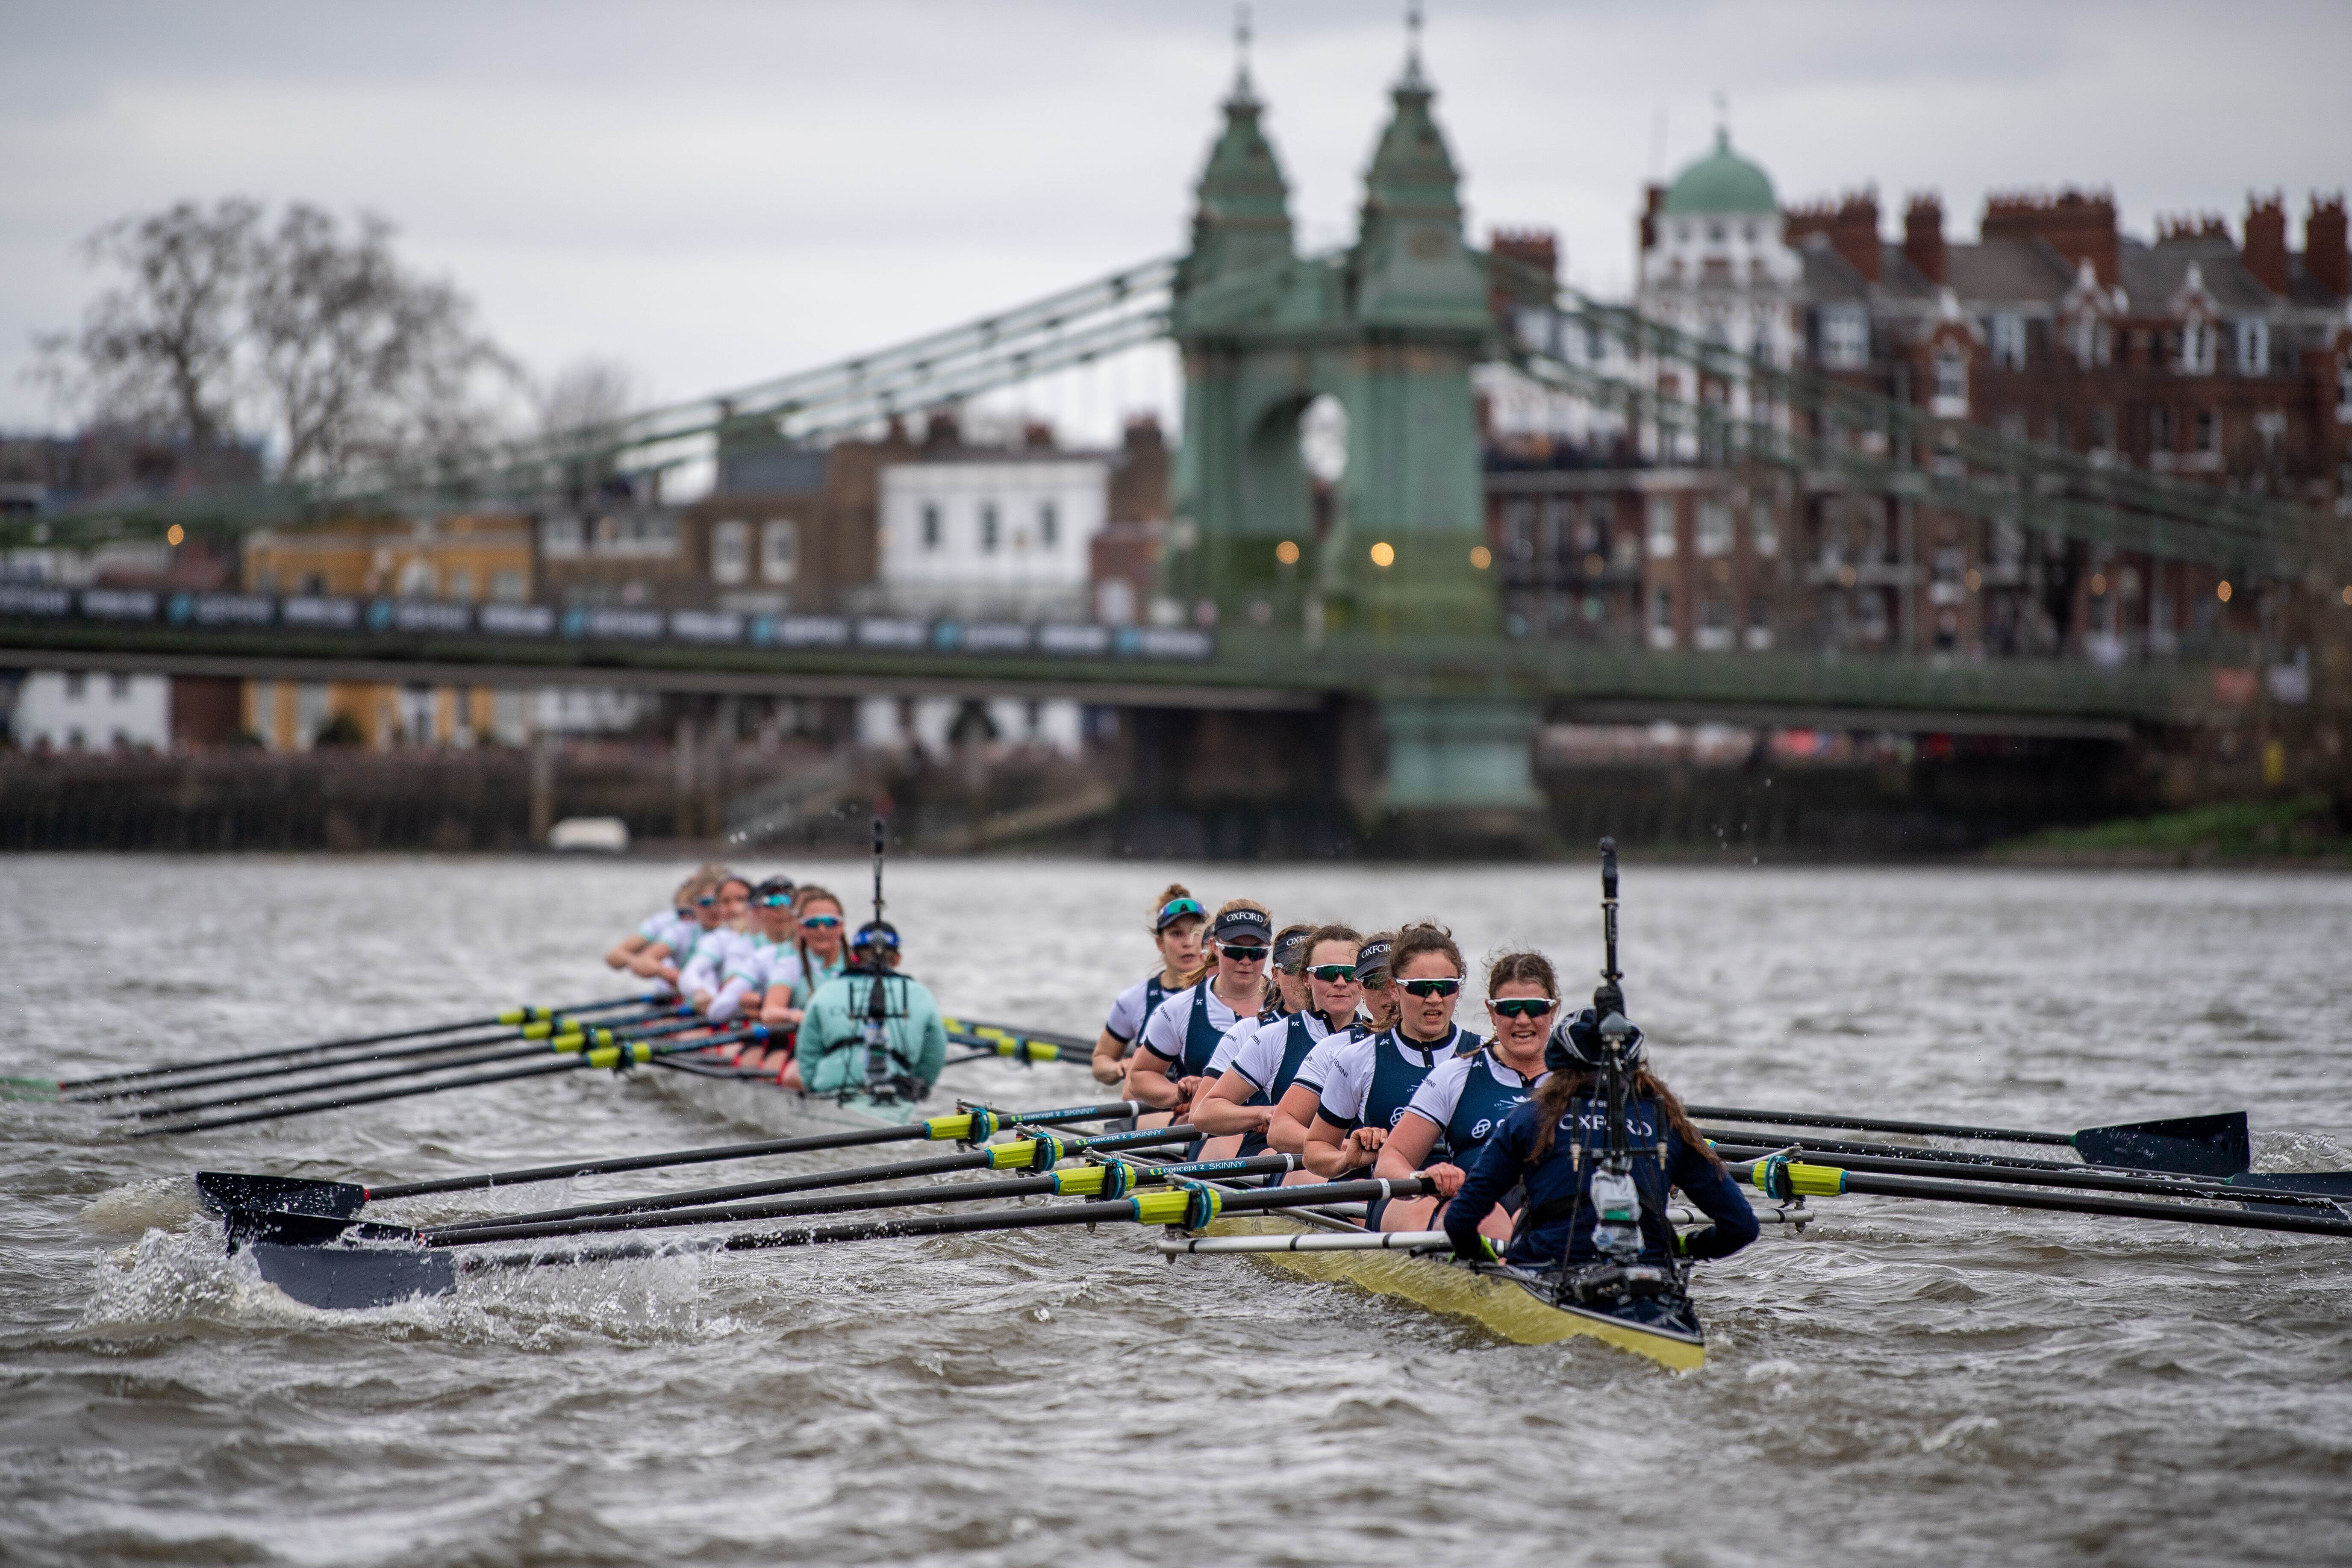 Cambridge claim clean sweep in Boat Race 2023 University of Oxford